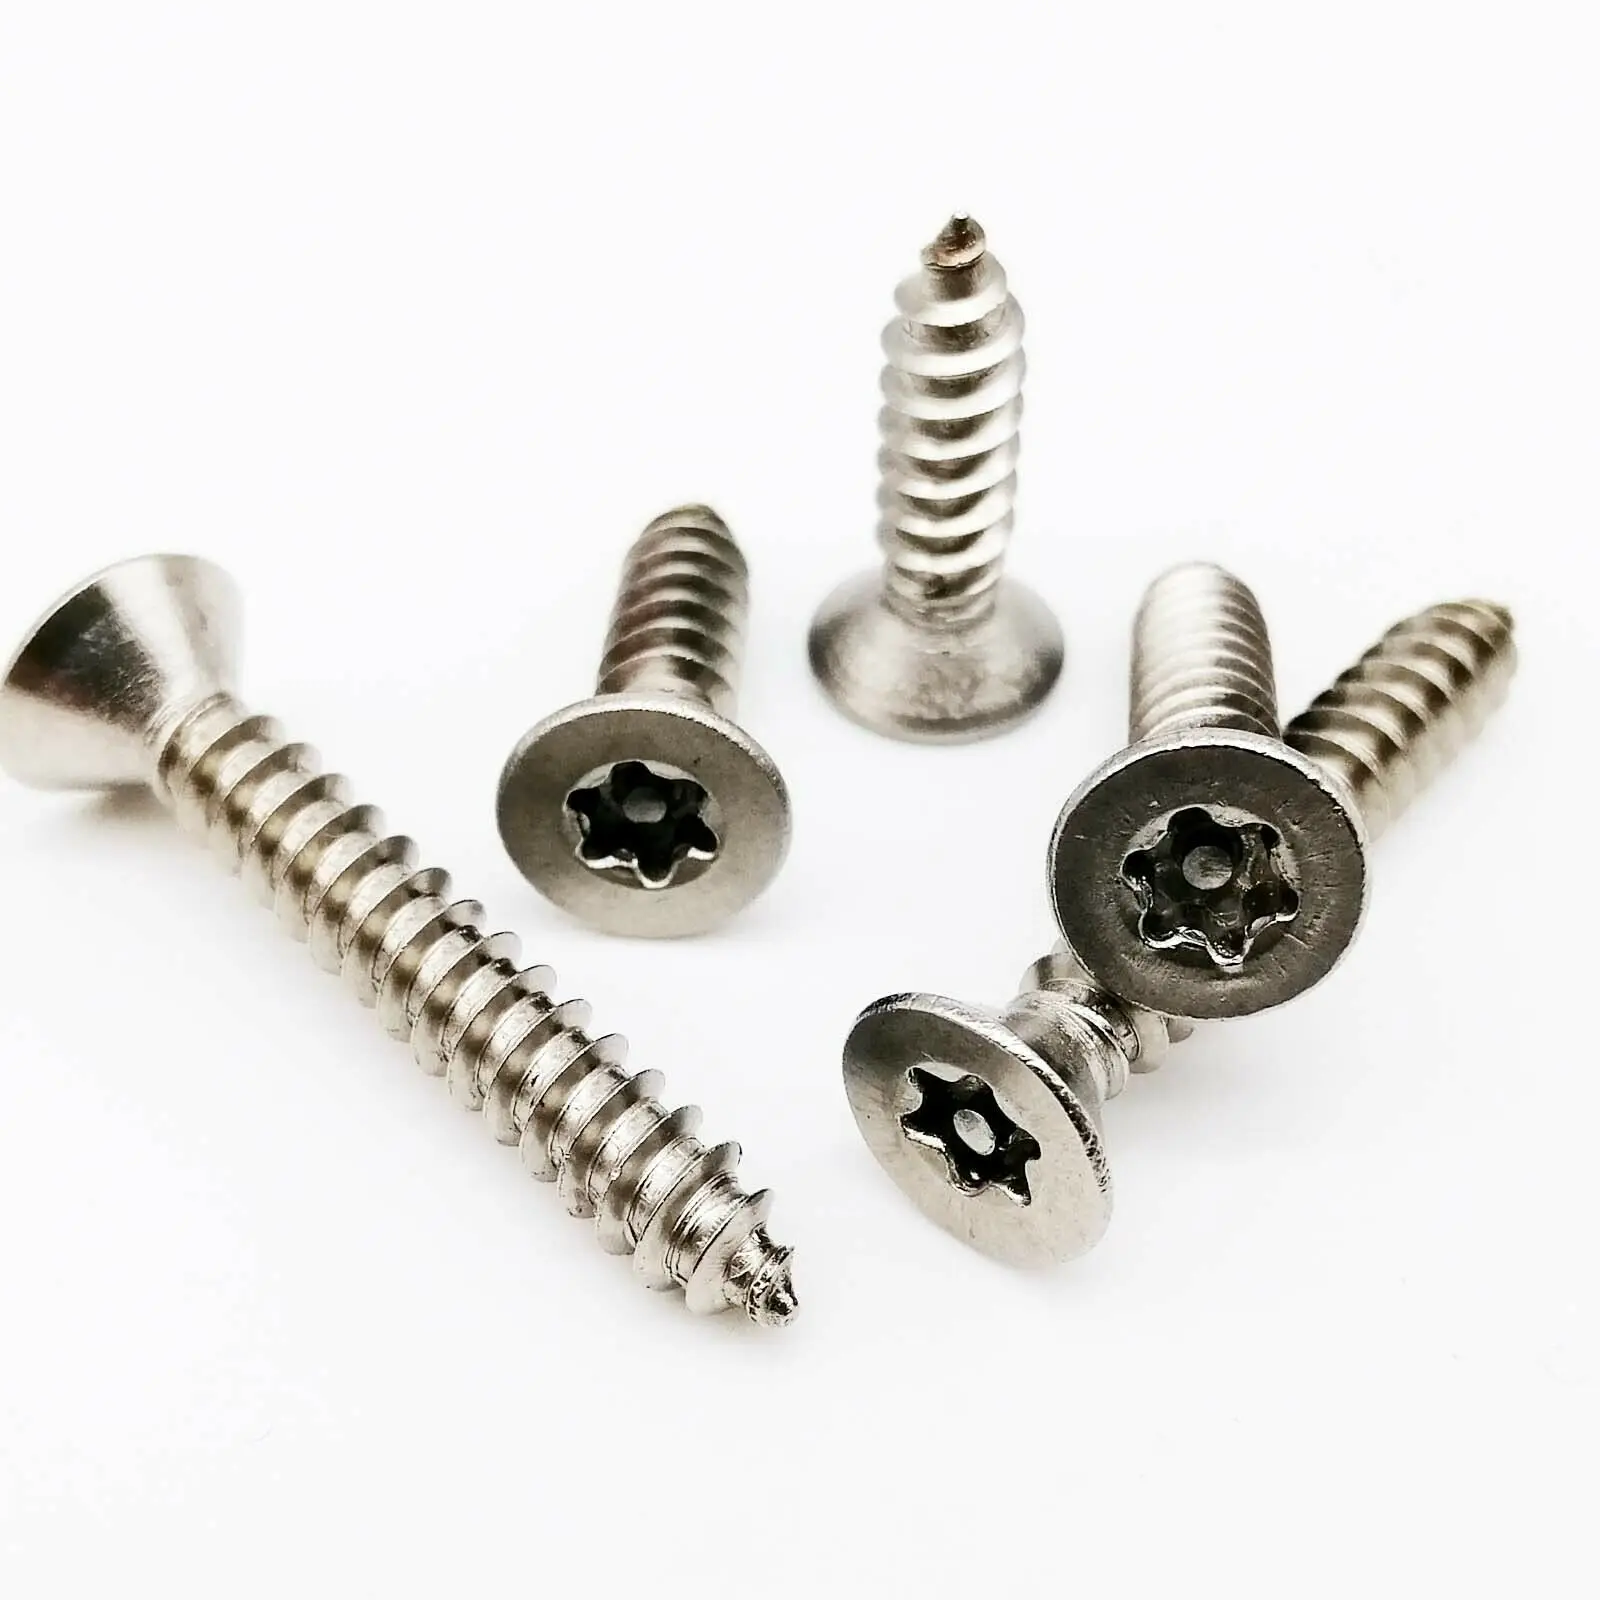 

20pc Six Lobe Torx Bolt Self-tapping Screw M2.9 M3.5 M3.9 A2 Stainless Steel Countersunk Flat Head Security Wood Screw with Piin